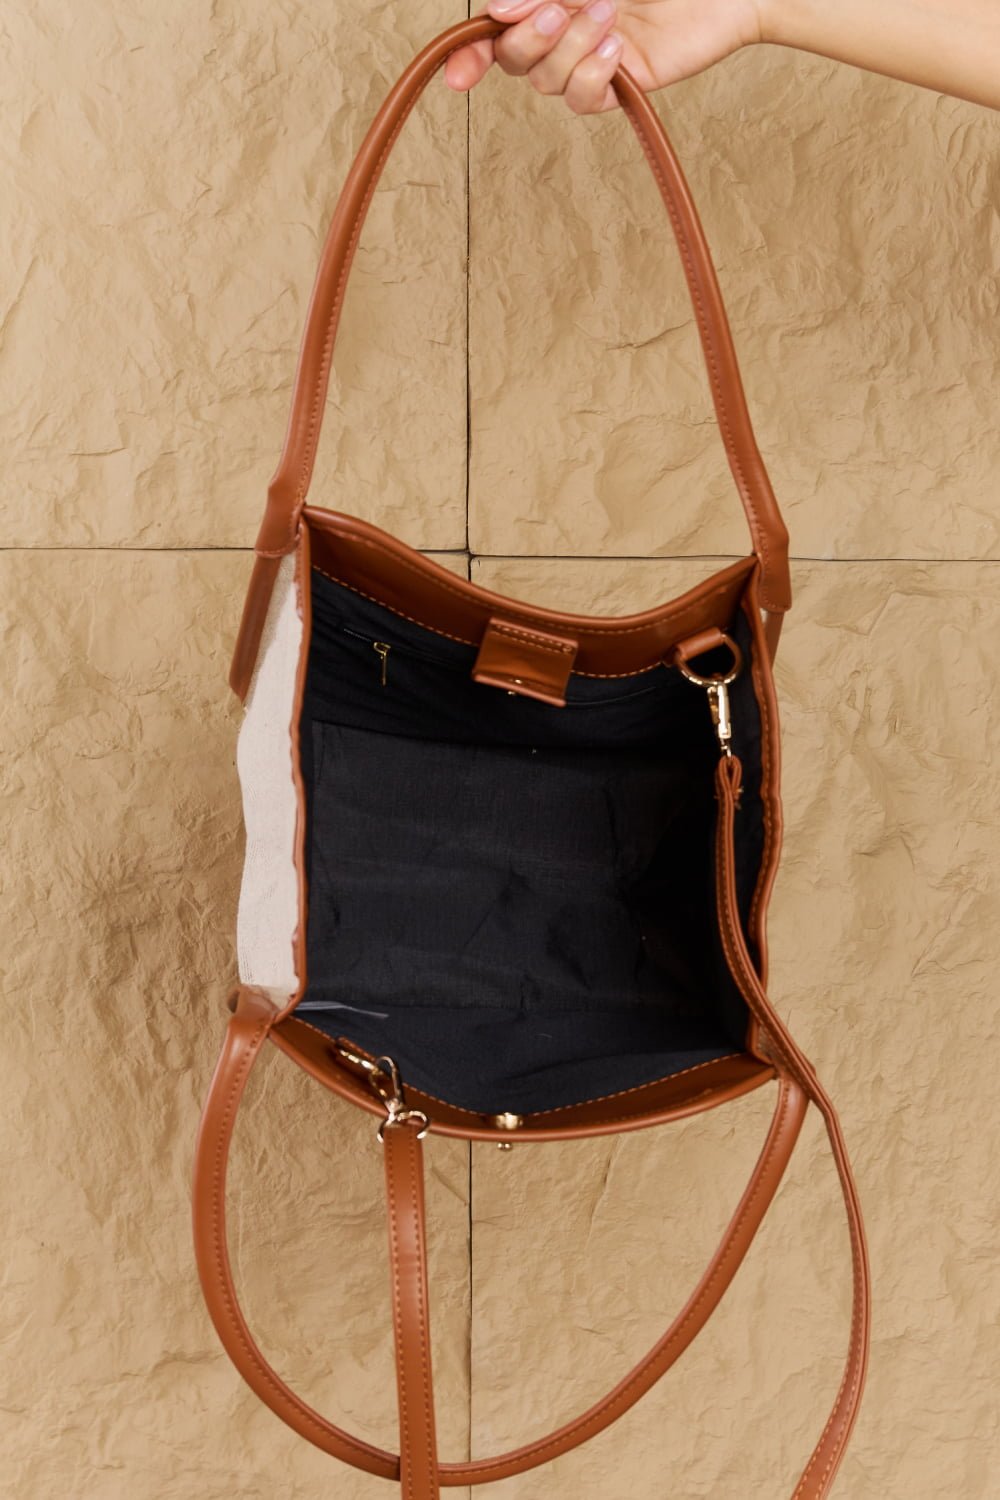 Beach Chic Faux Leather Trim Tote Bag in OchreTote BagFame